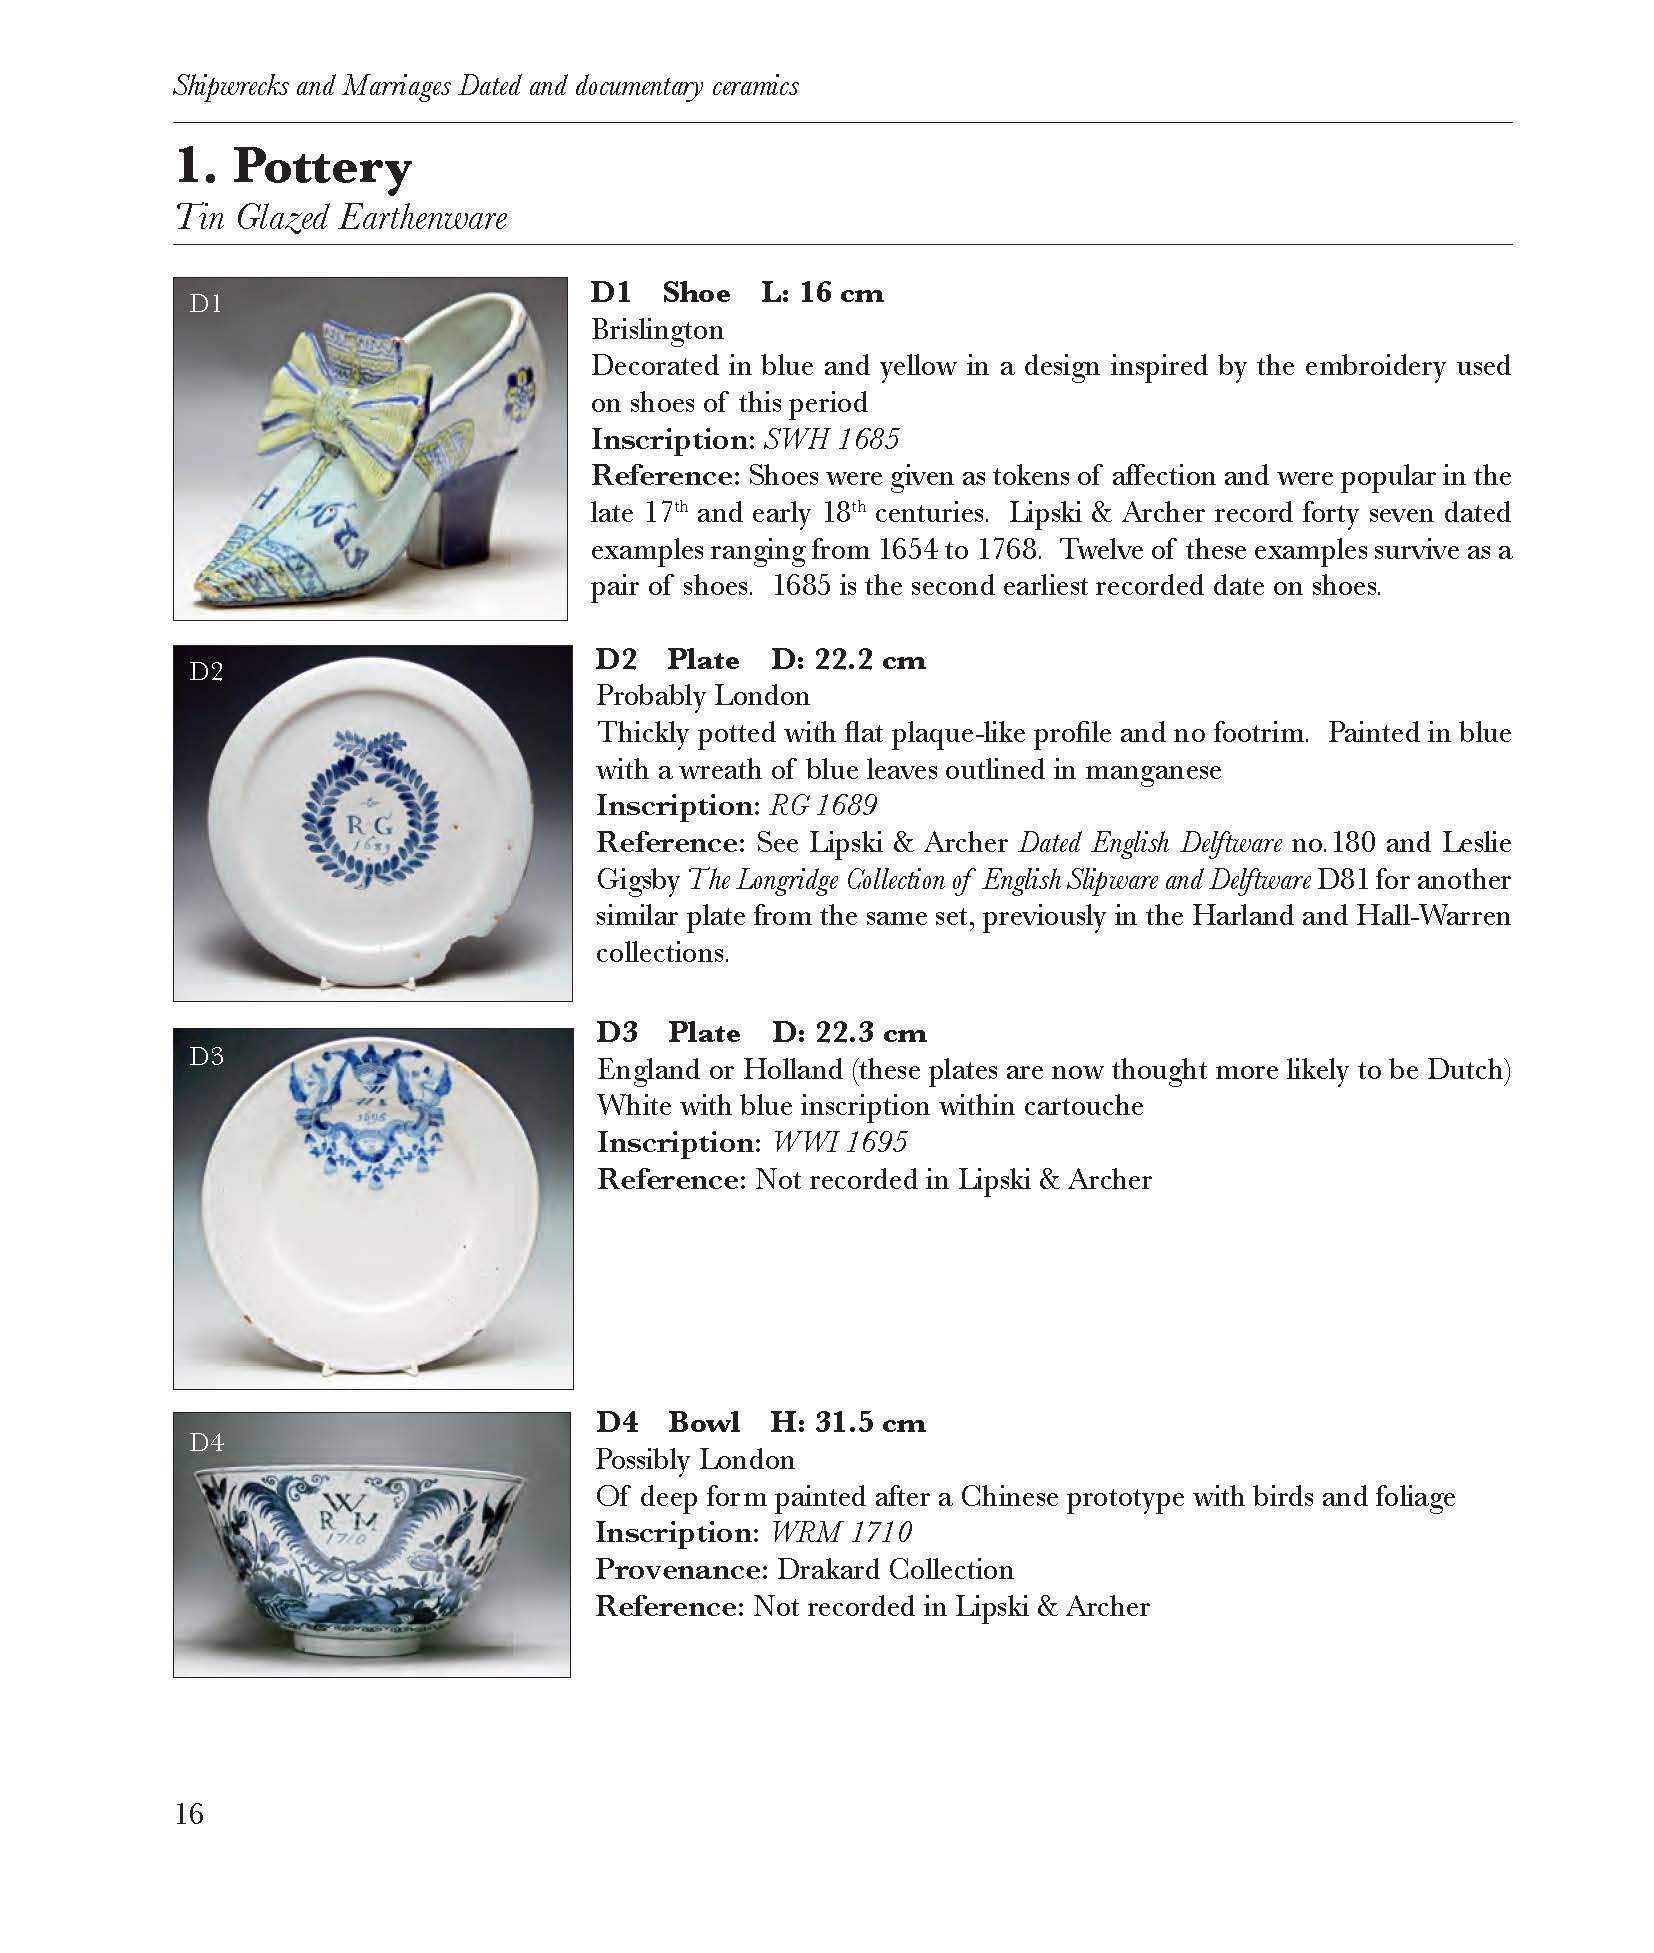 					View Shipwrecks and Marriages - Dated and Documentary Ceramics
				